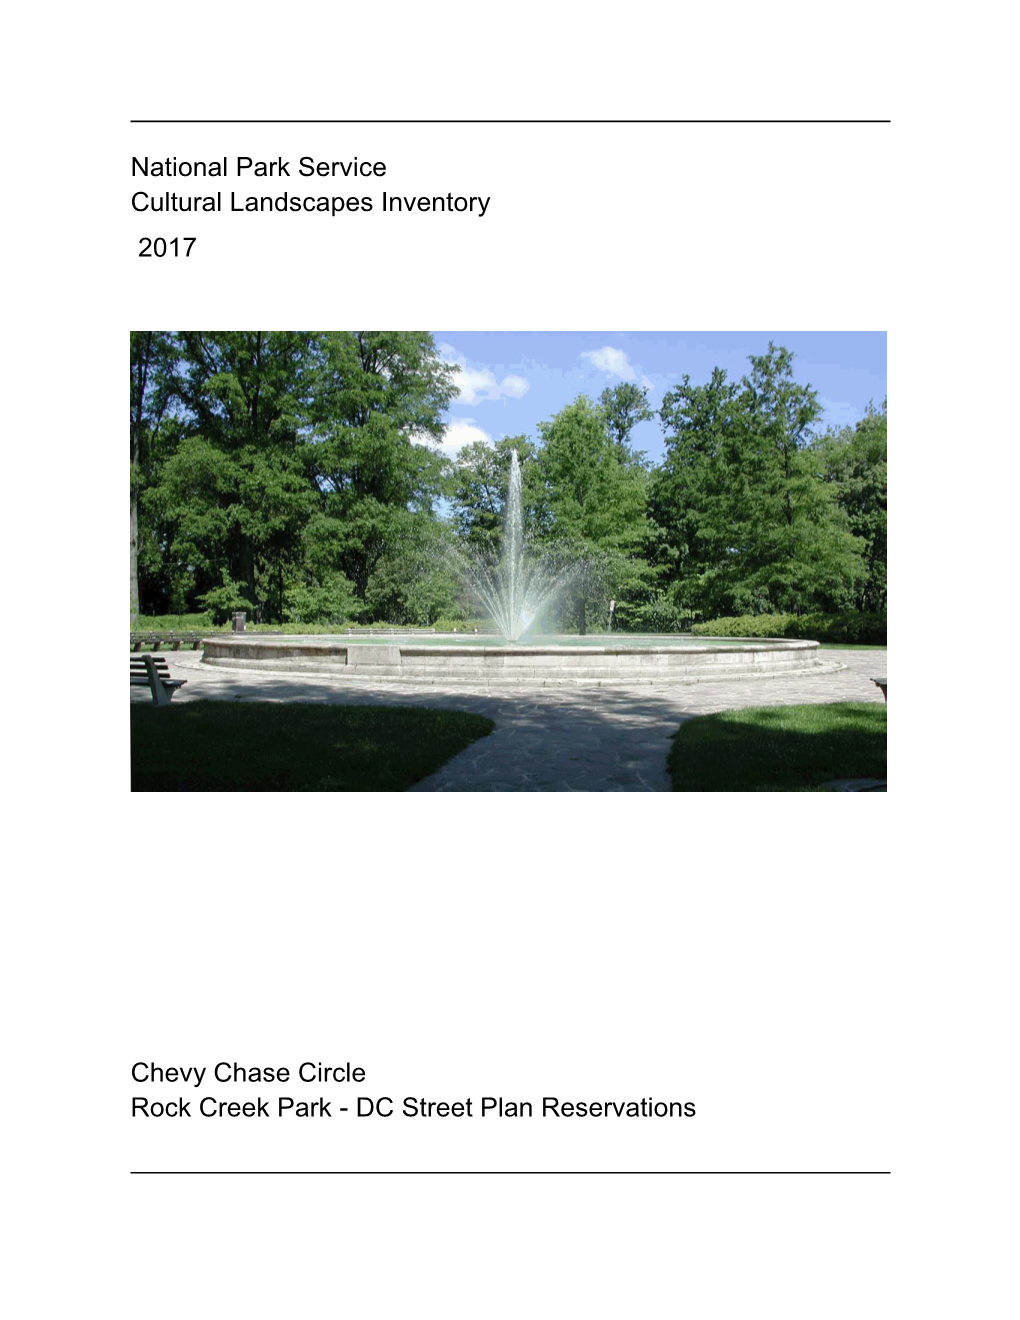 National Park Service Cultural Landscapes Inventory 2017 Chevy